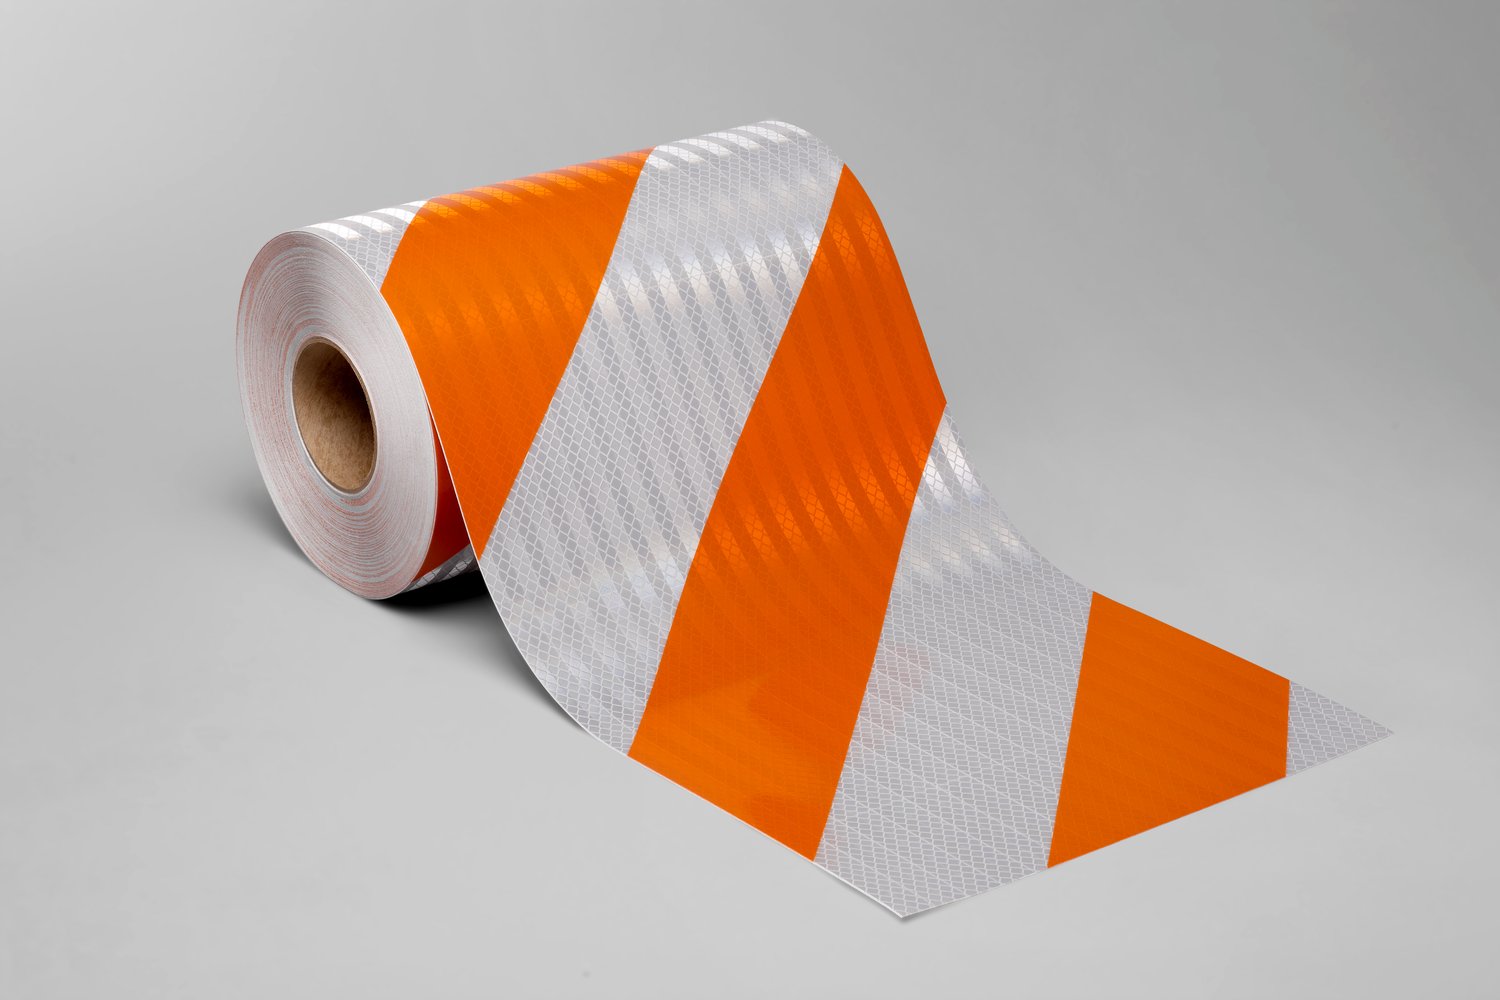 7010535241 - 3M Flexible Prismatic Reflective Barricade Sheeting 3336R Orange/White, 6 in stripe/right, 12 in x 50 yd